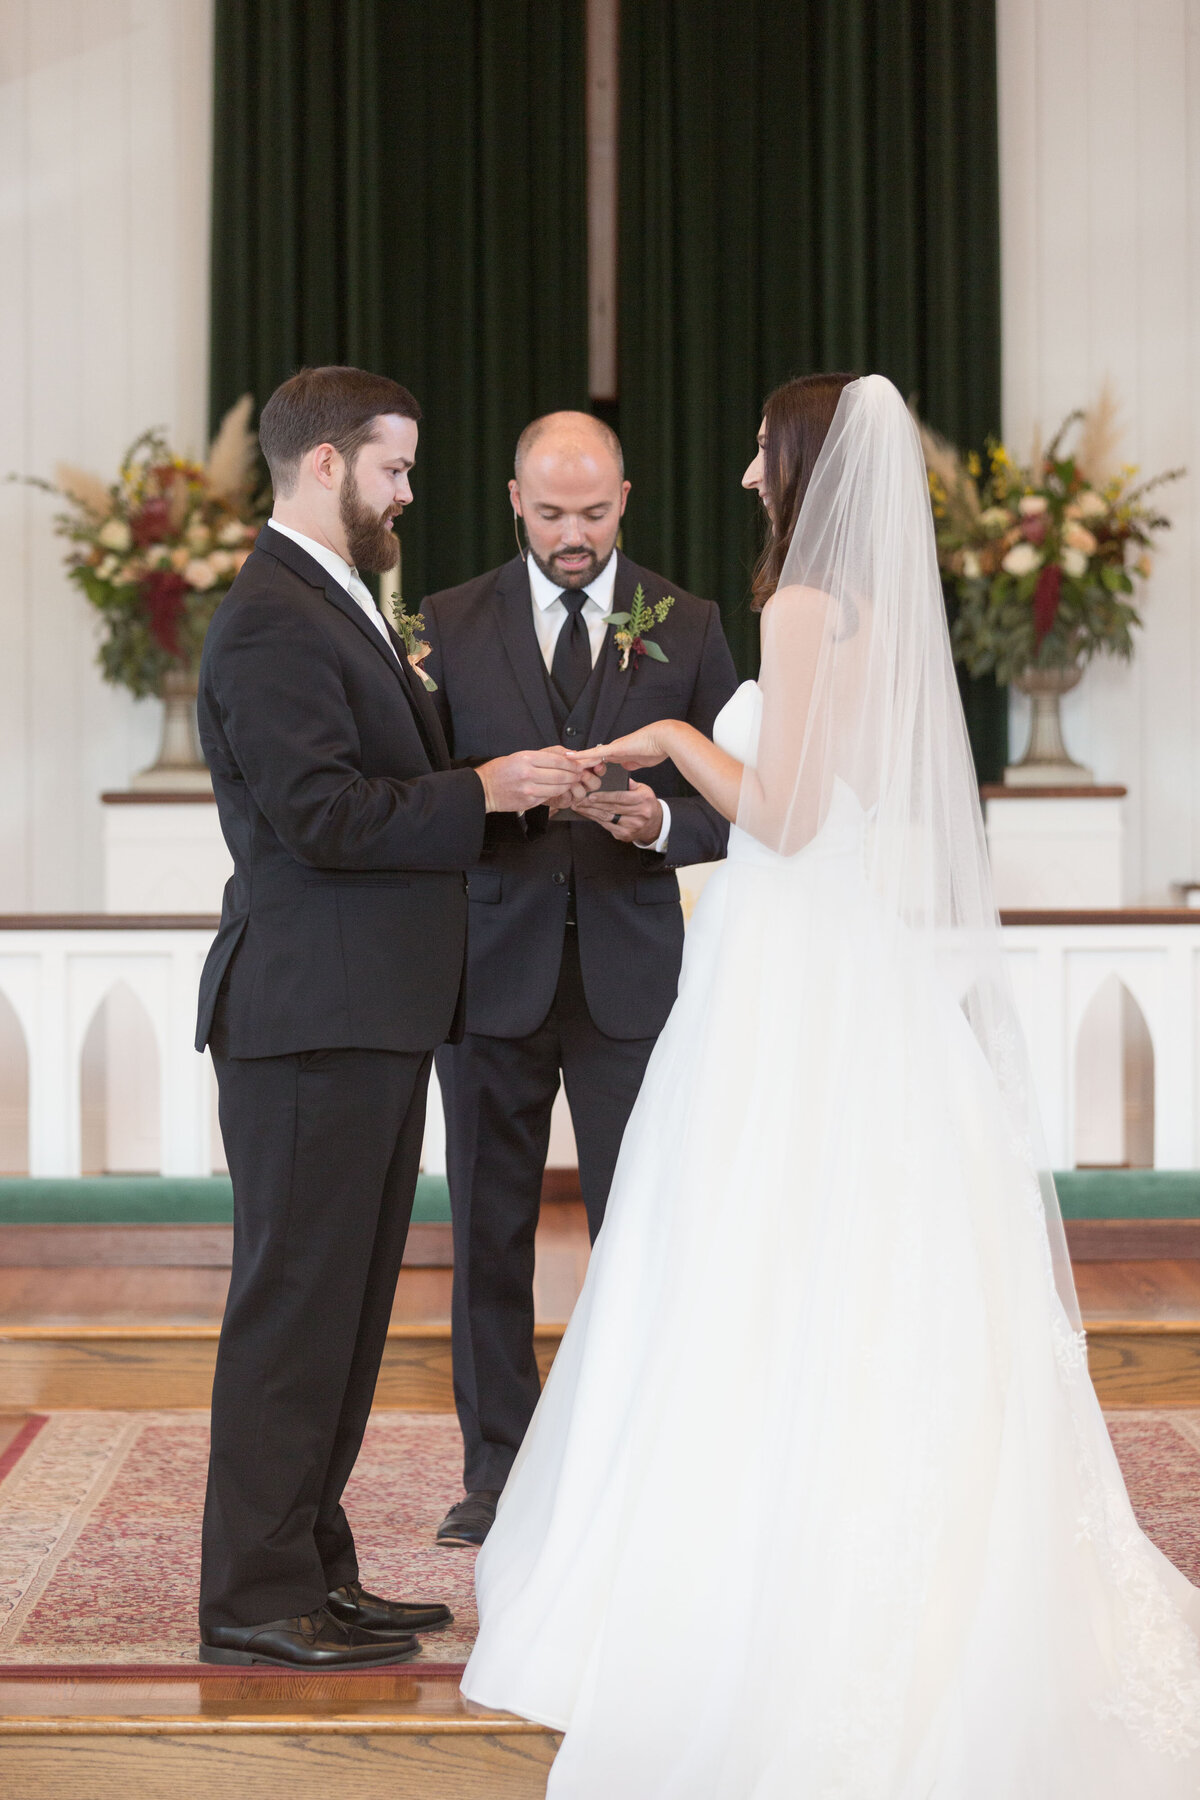 The groom receives his ring from the bride during the wedding ceremony at St. Francis Episcopal Church in Point Clear, Alabama.